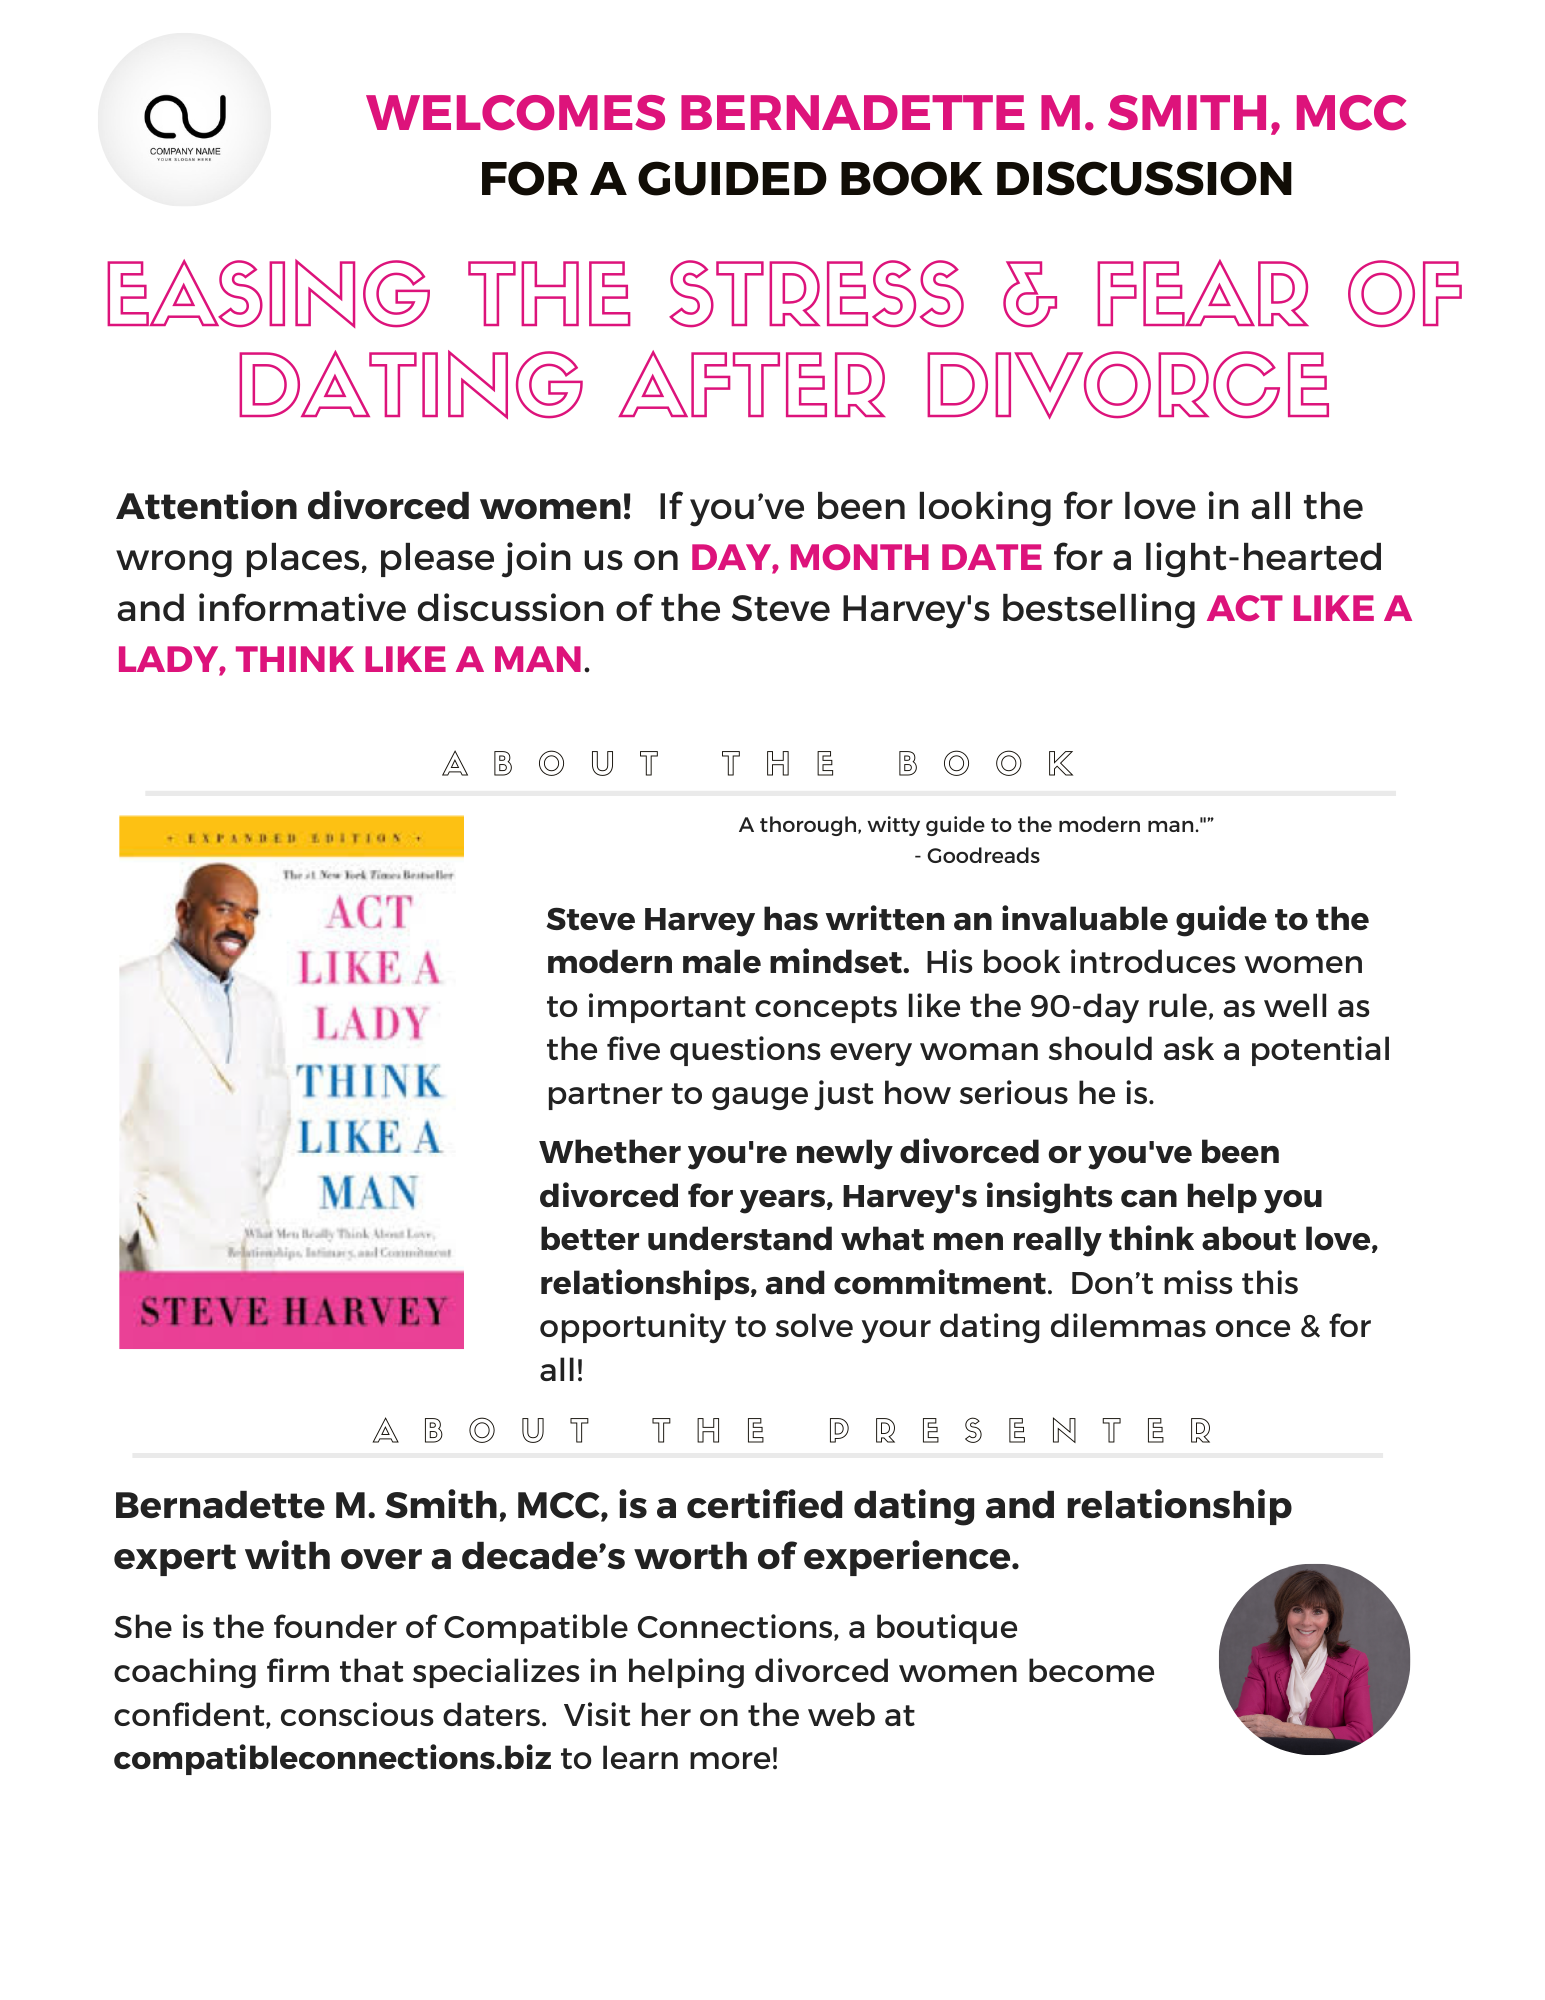 Promotional flyer for a guided book discussion of Steve Harvey's Act Like A Lady, Think Like A Man.